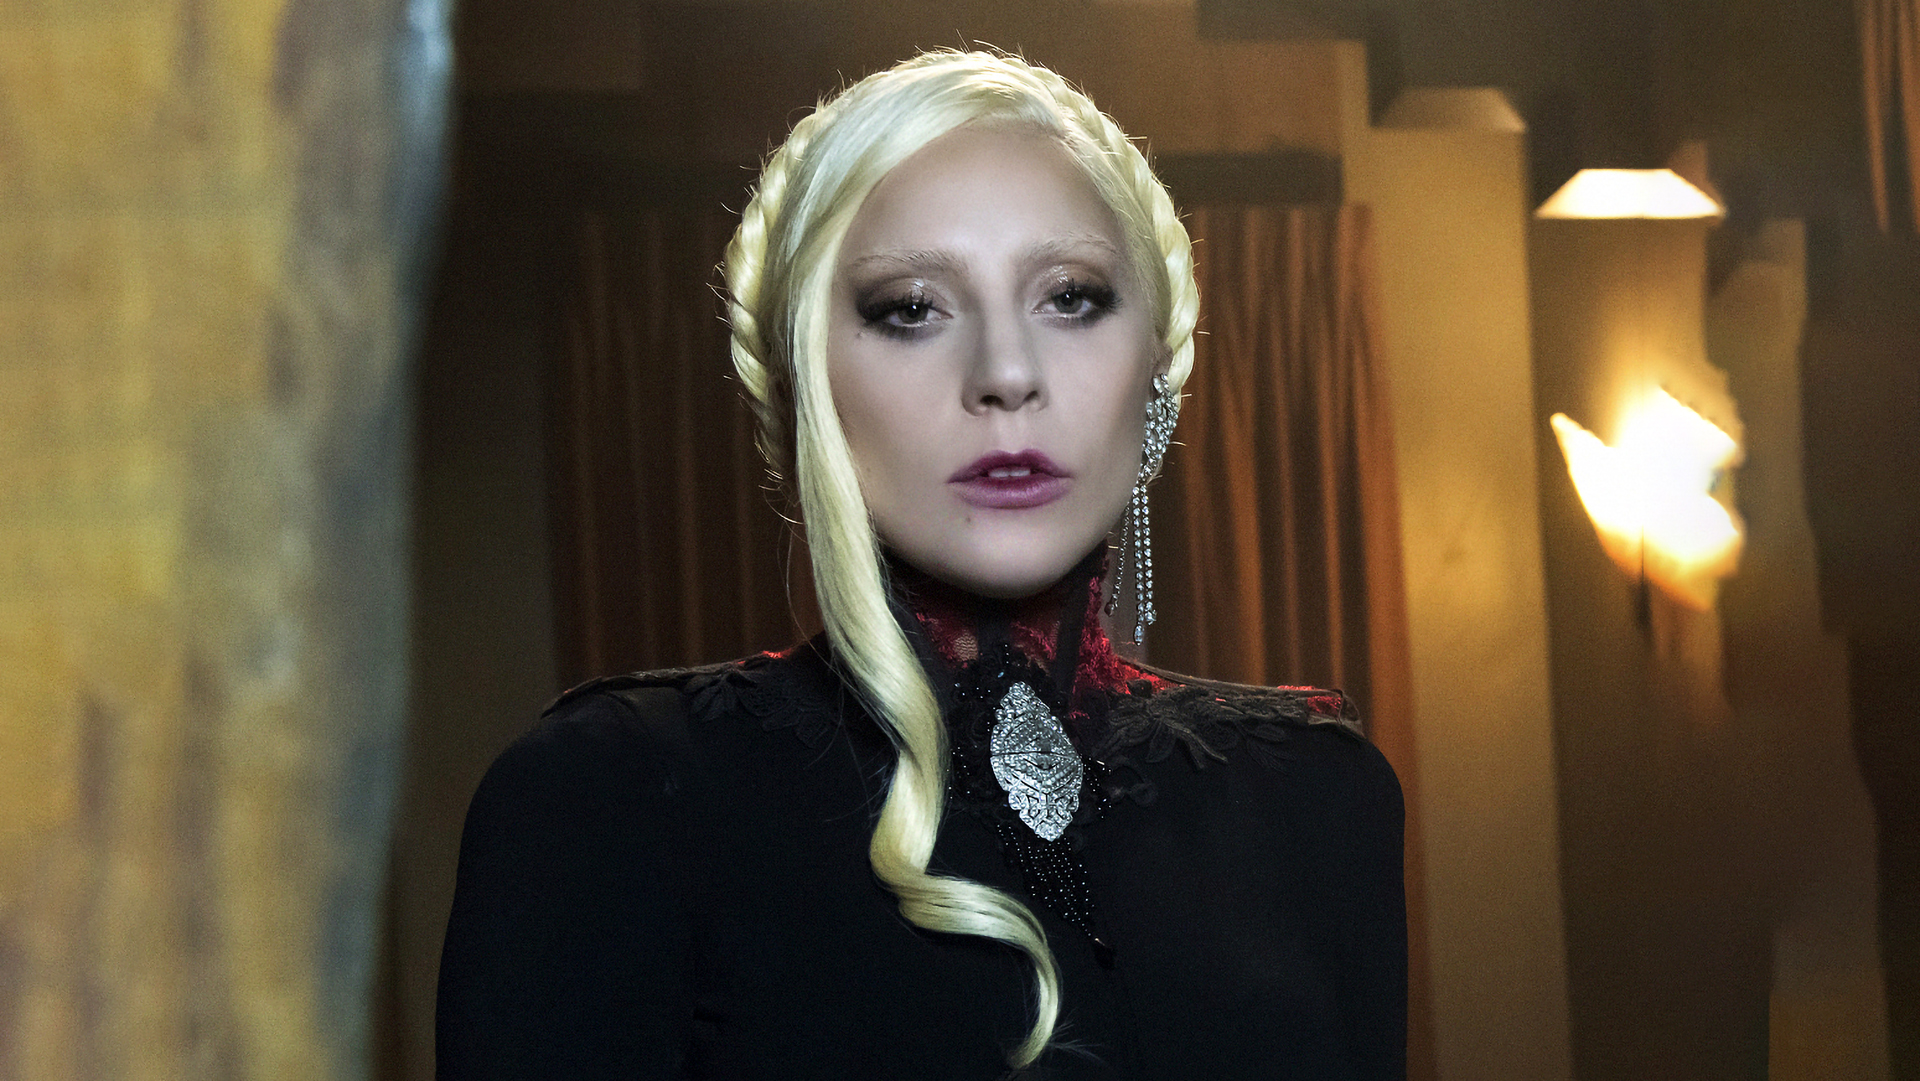 Ranking 10 Best American Horror Story Characters (Lady Gaga is Only #2)